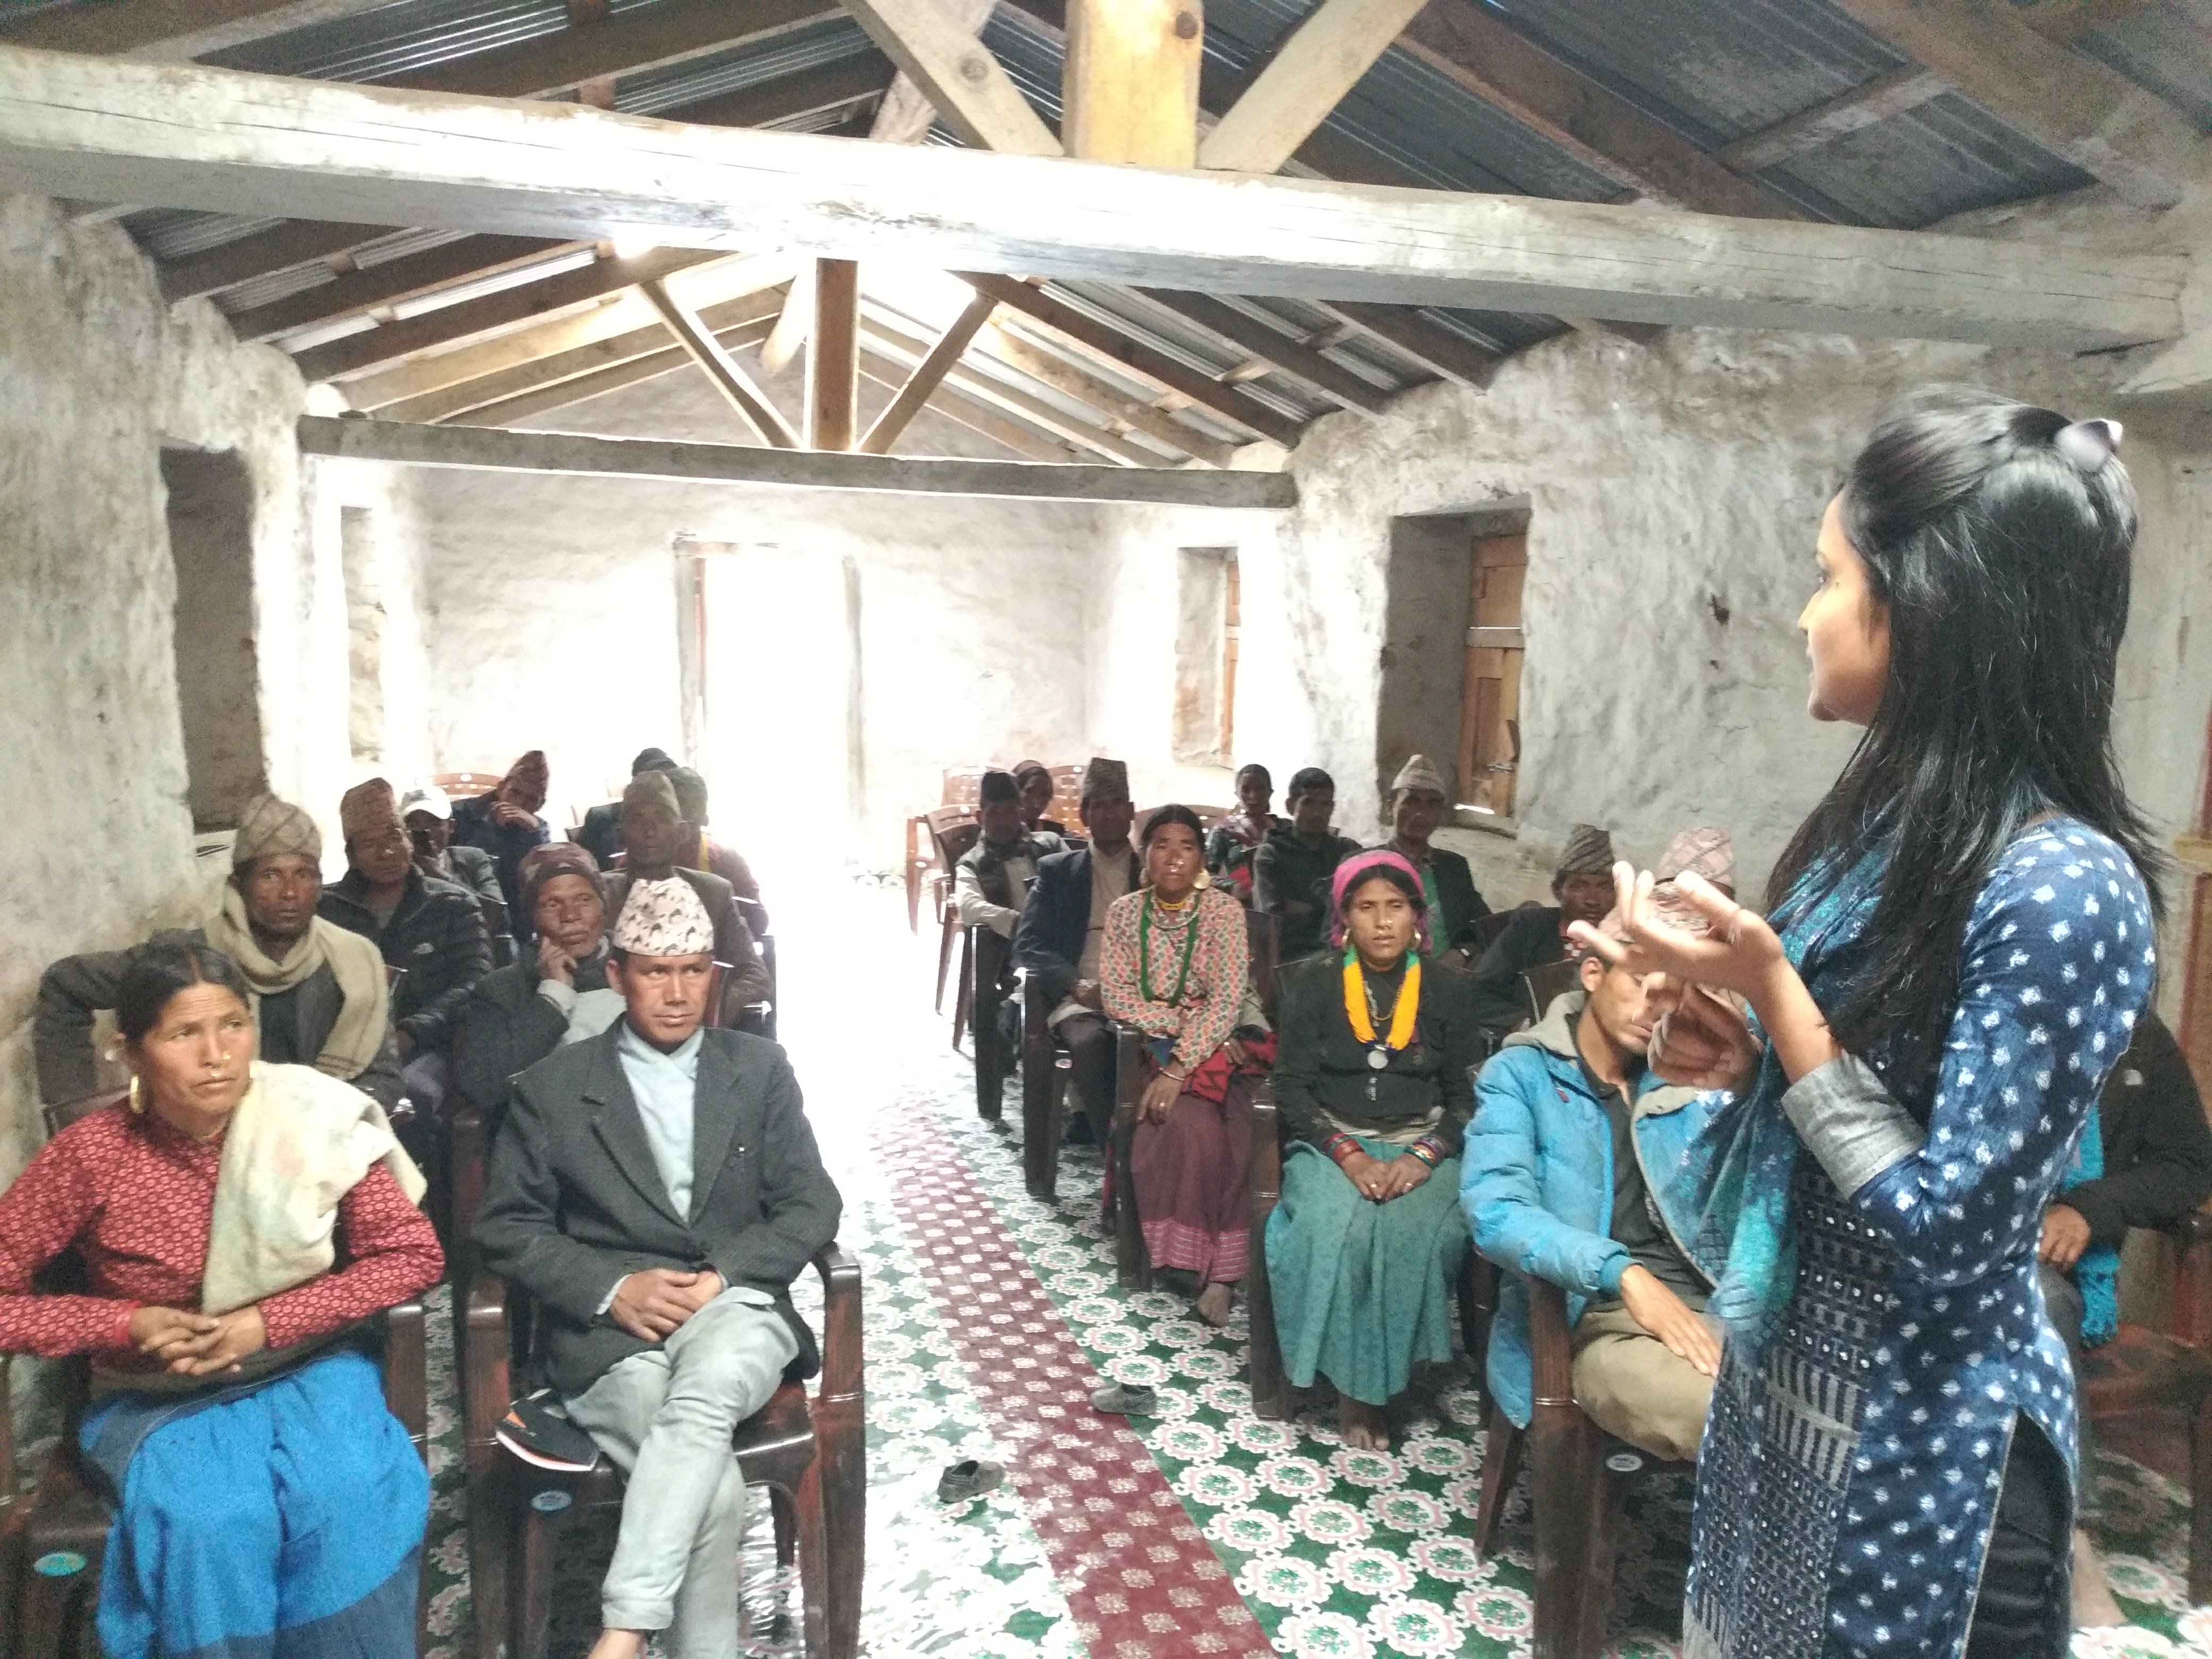 A mentor of International IDEA’s Coherence programme explaining the elected representatives of a Adanchuli Gaunpalika (rural municipality) of Nepal’s Karnali Province about the importance of their Gaunpalika’s strategic vision in annual planning.  Photo credit: International IDEA